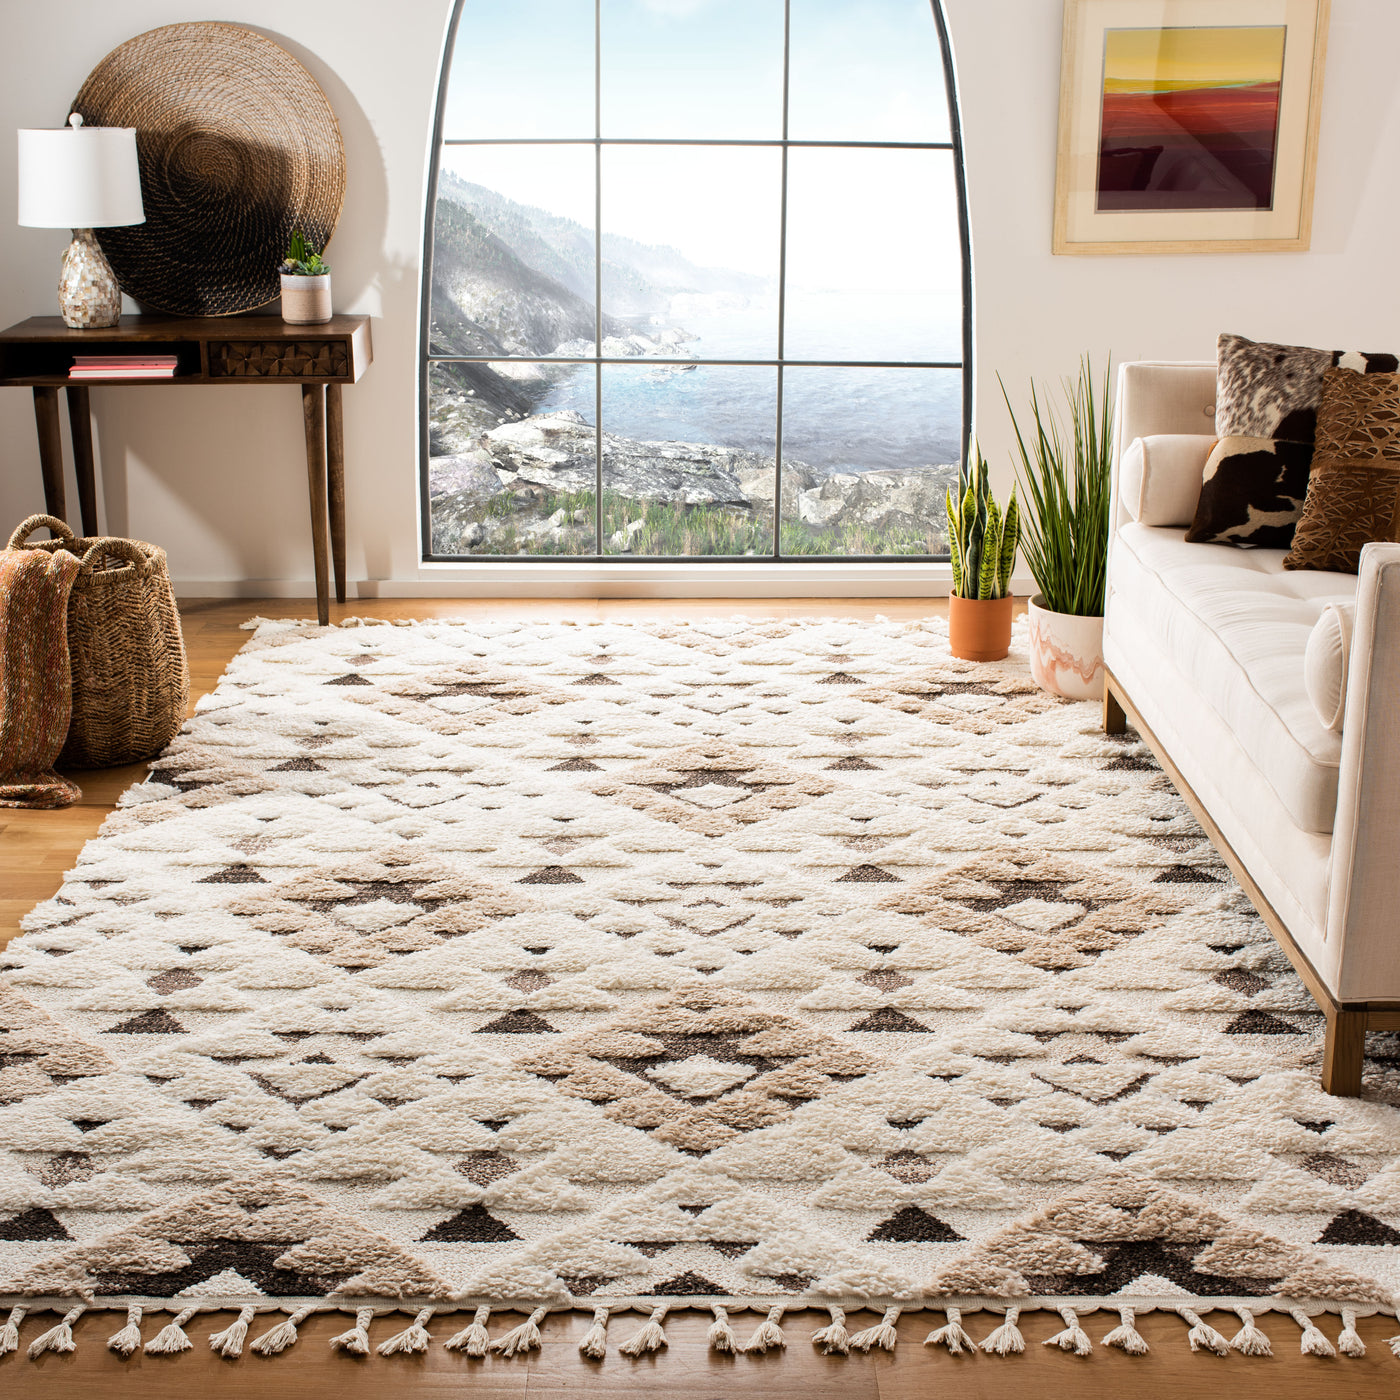 Buy Safavieh Rugs in Canada at Discounted Prices